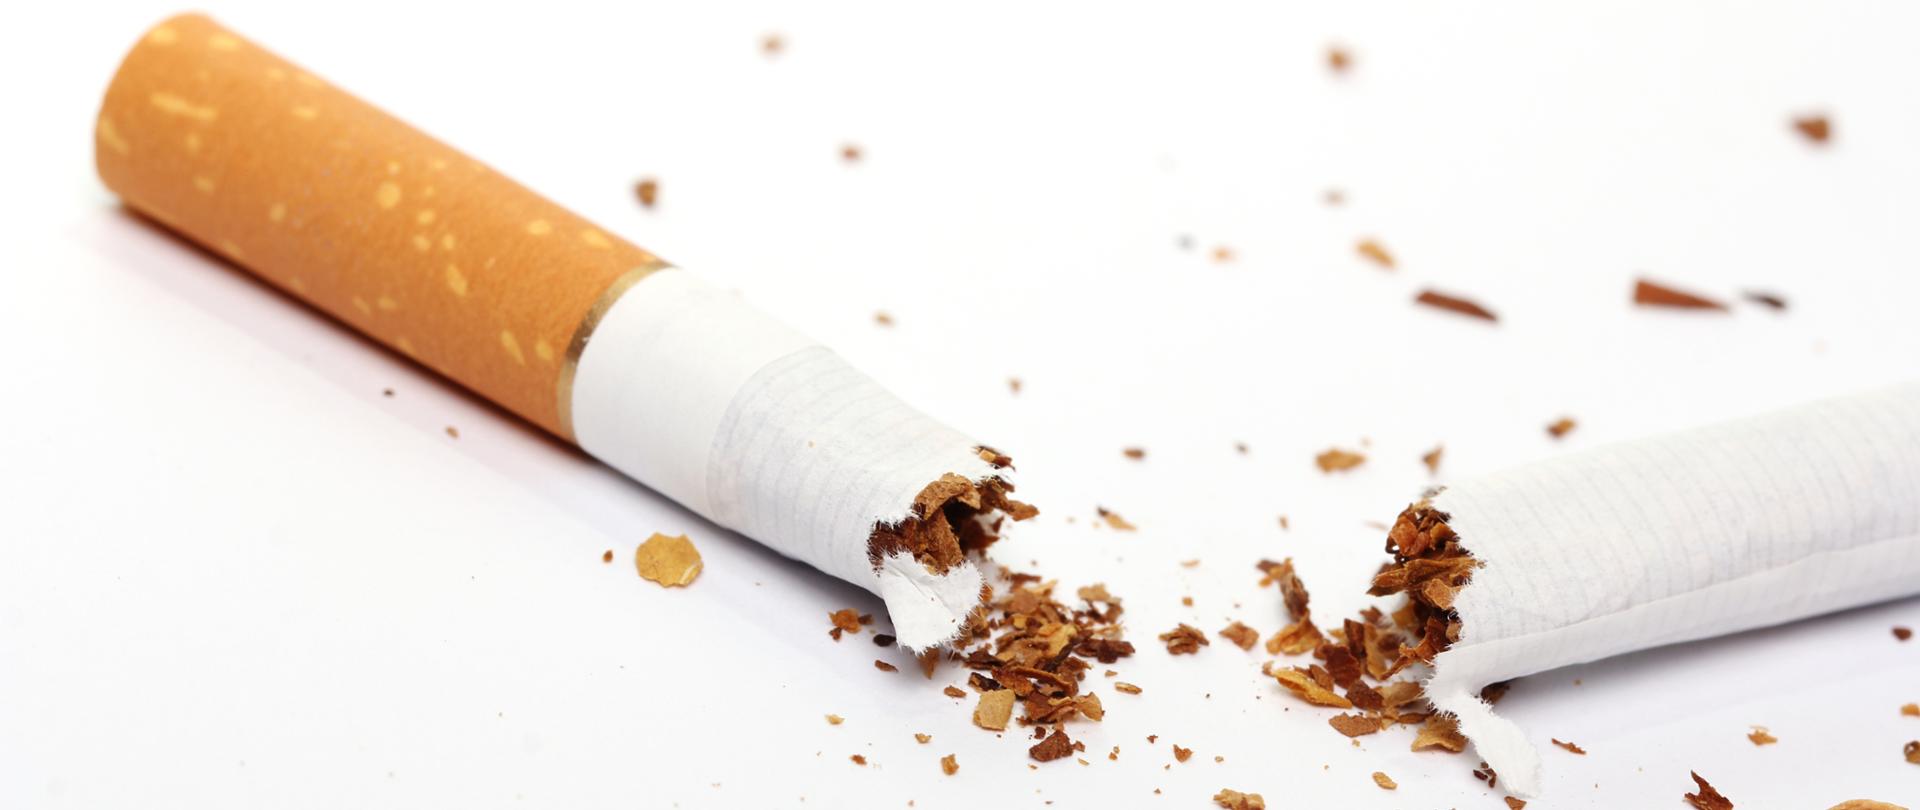 Close up of cigarette over white background